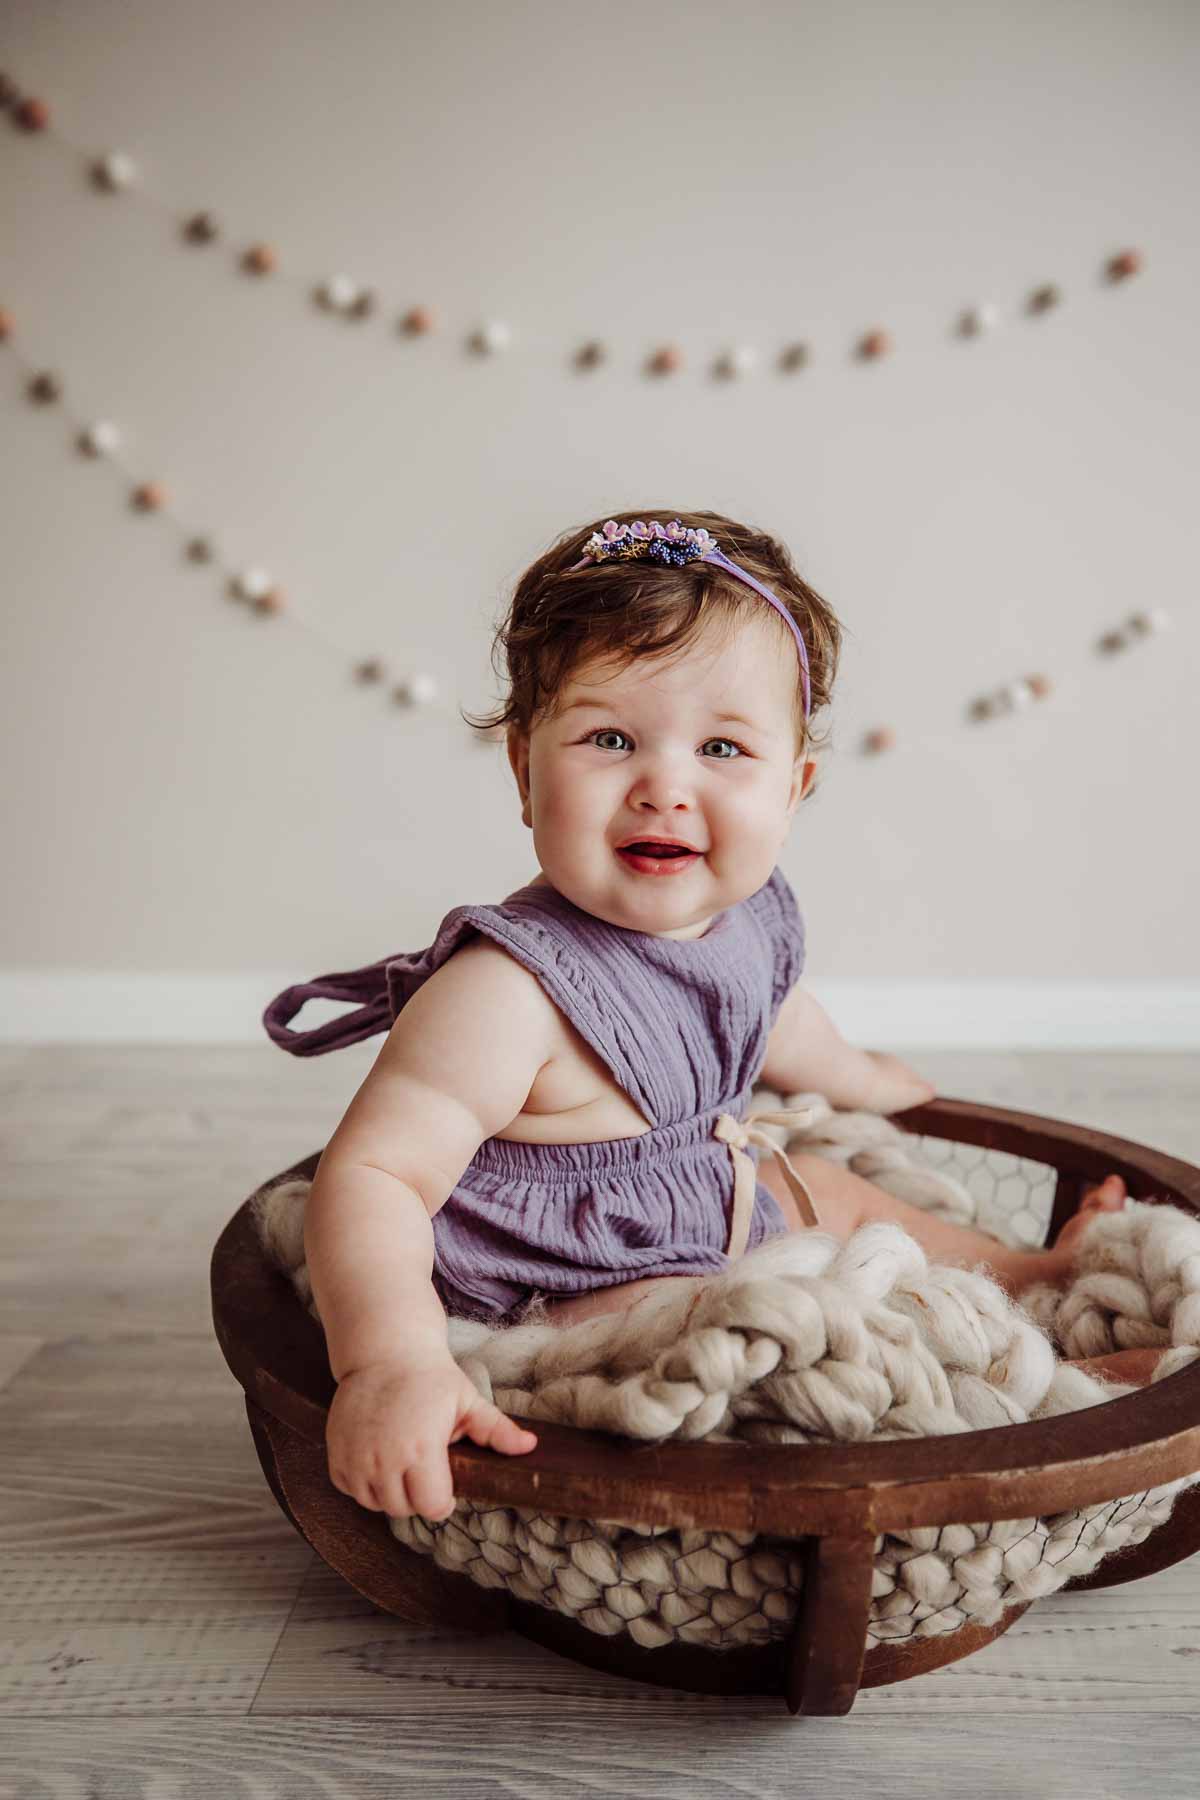 Cake Smash Session - baby girl sits on a blanket in a wooden bowl